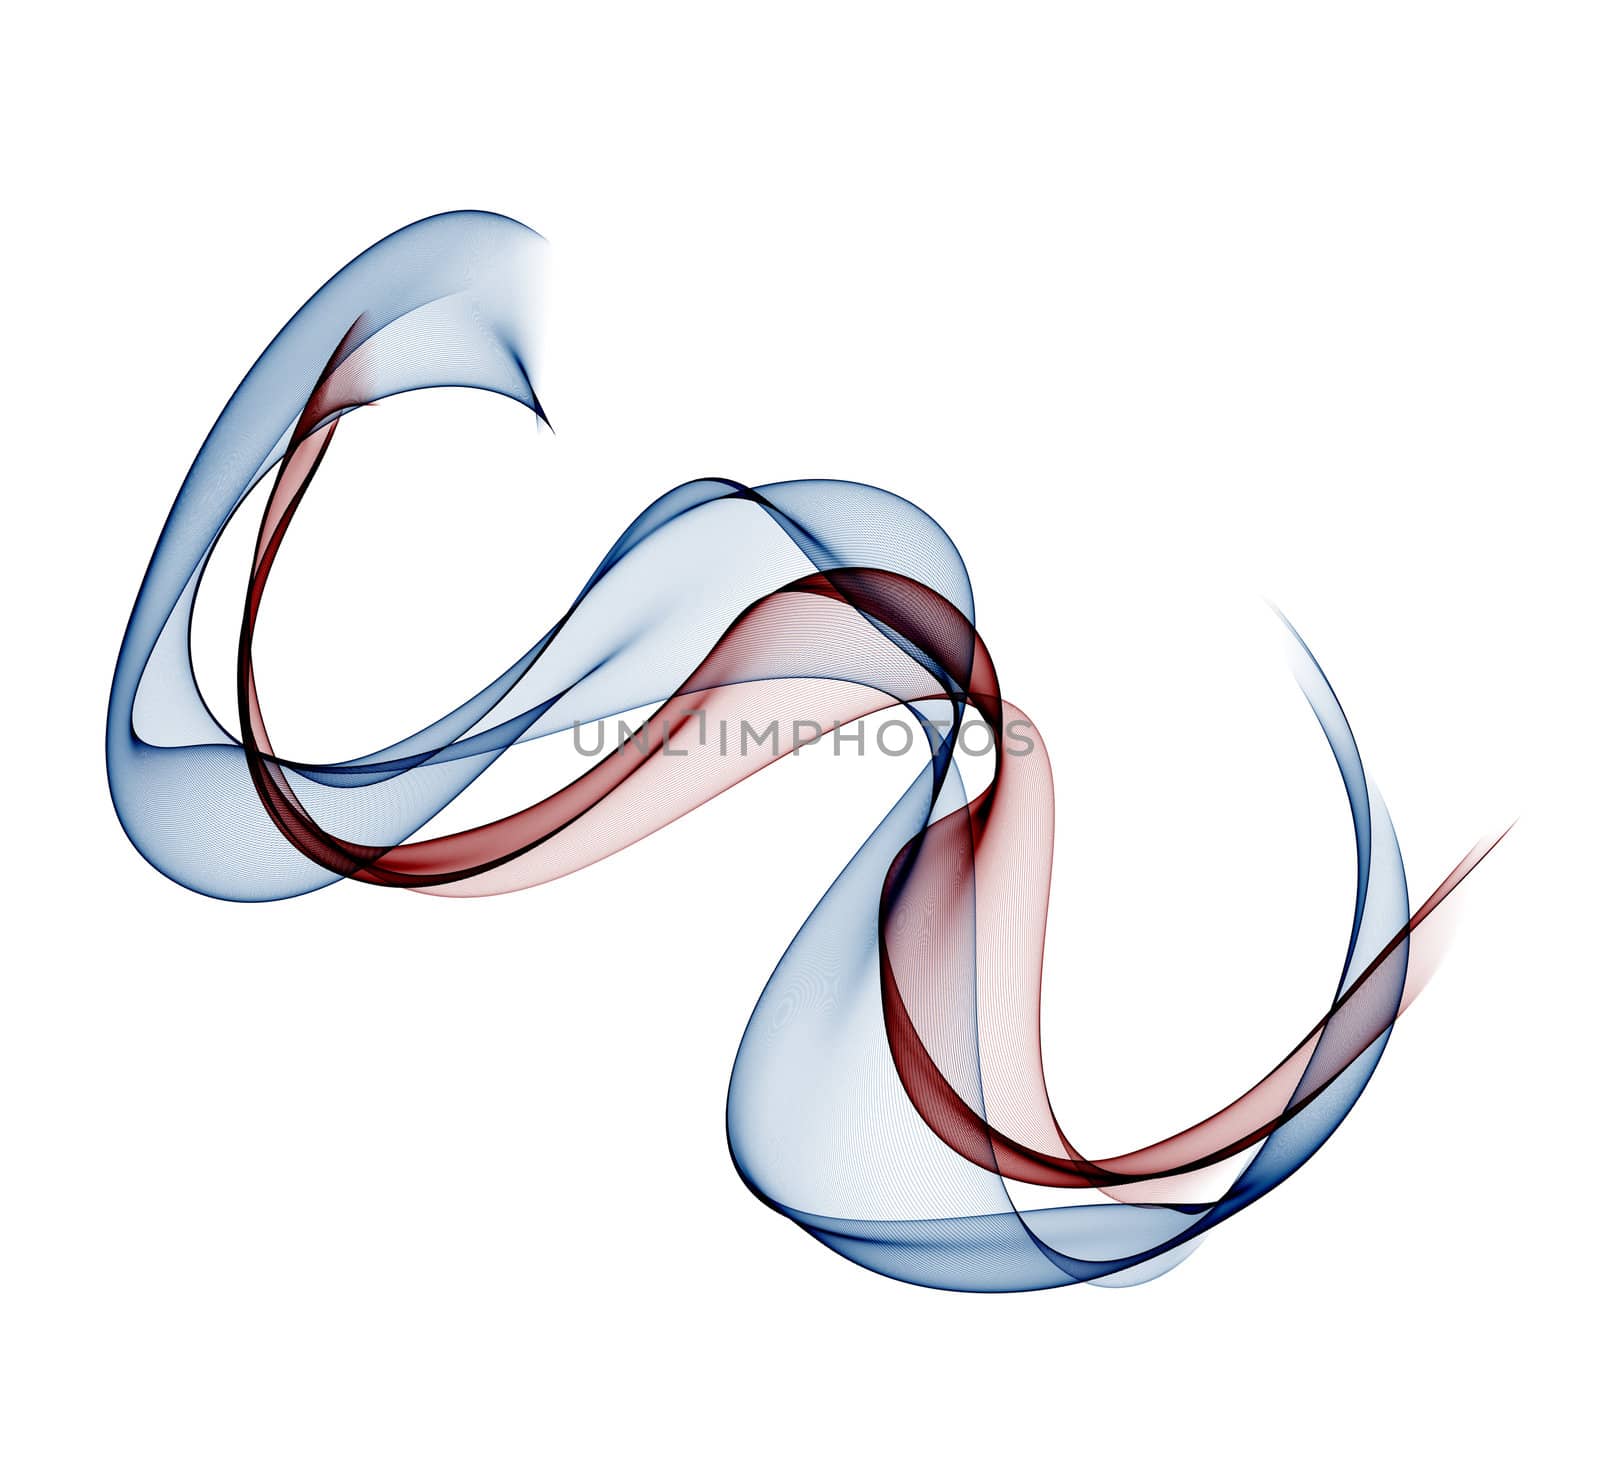 Blue and brown waves on a white background by Serp